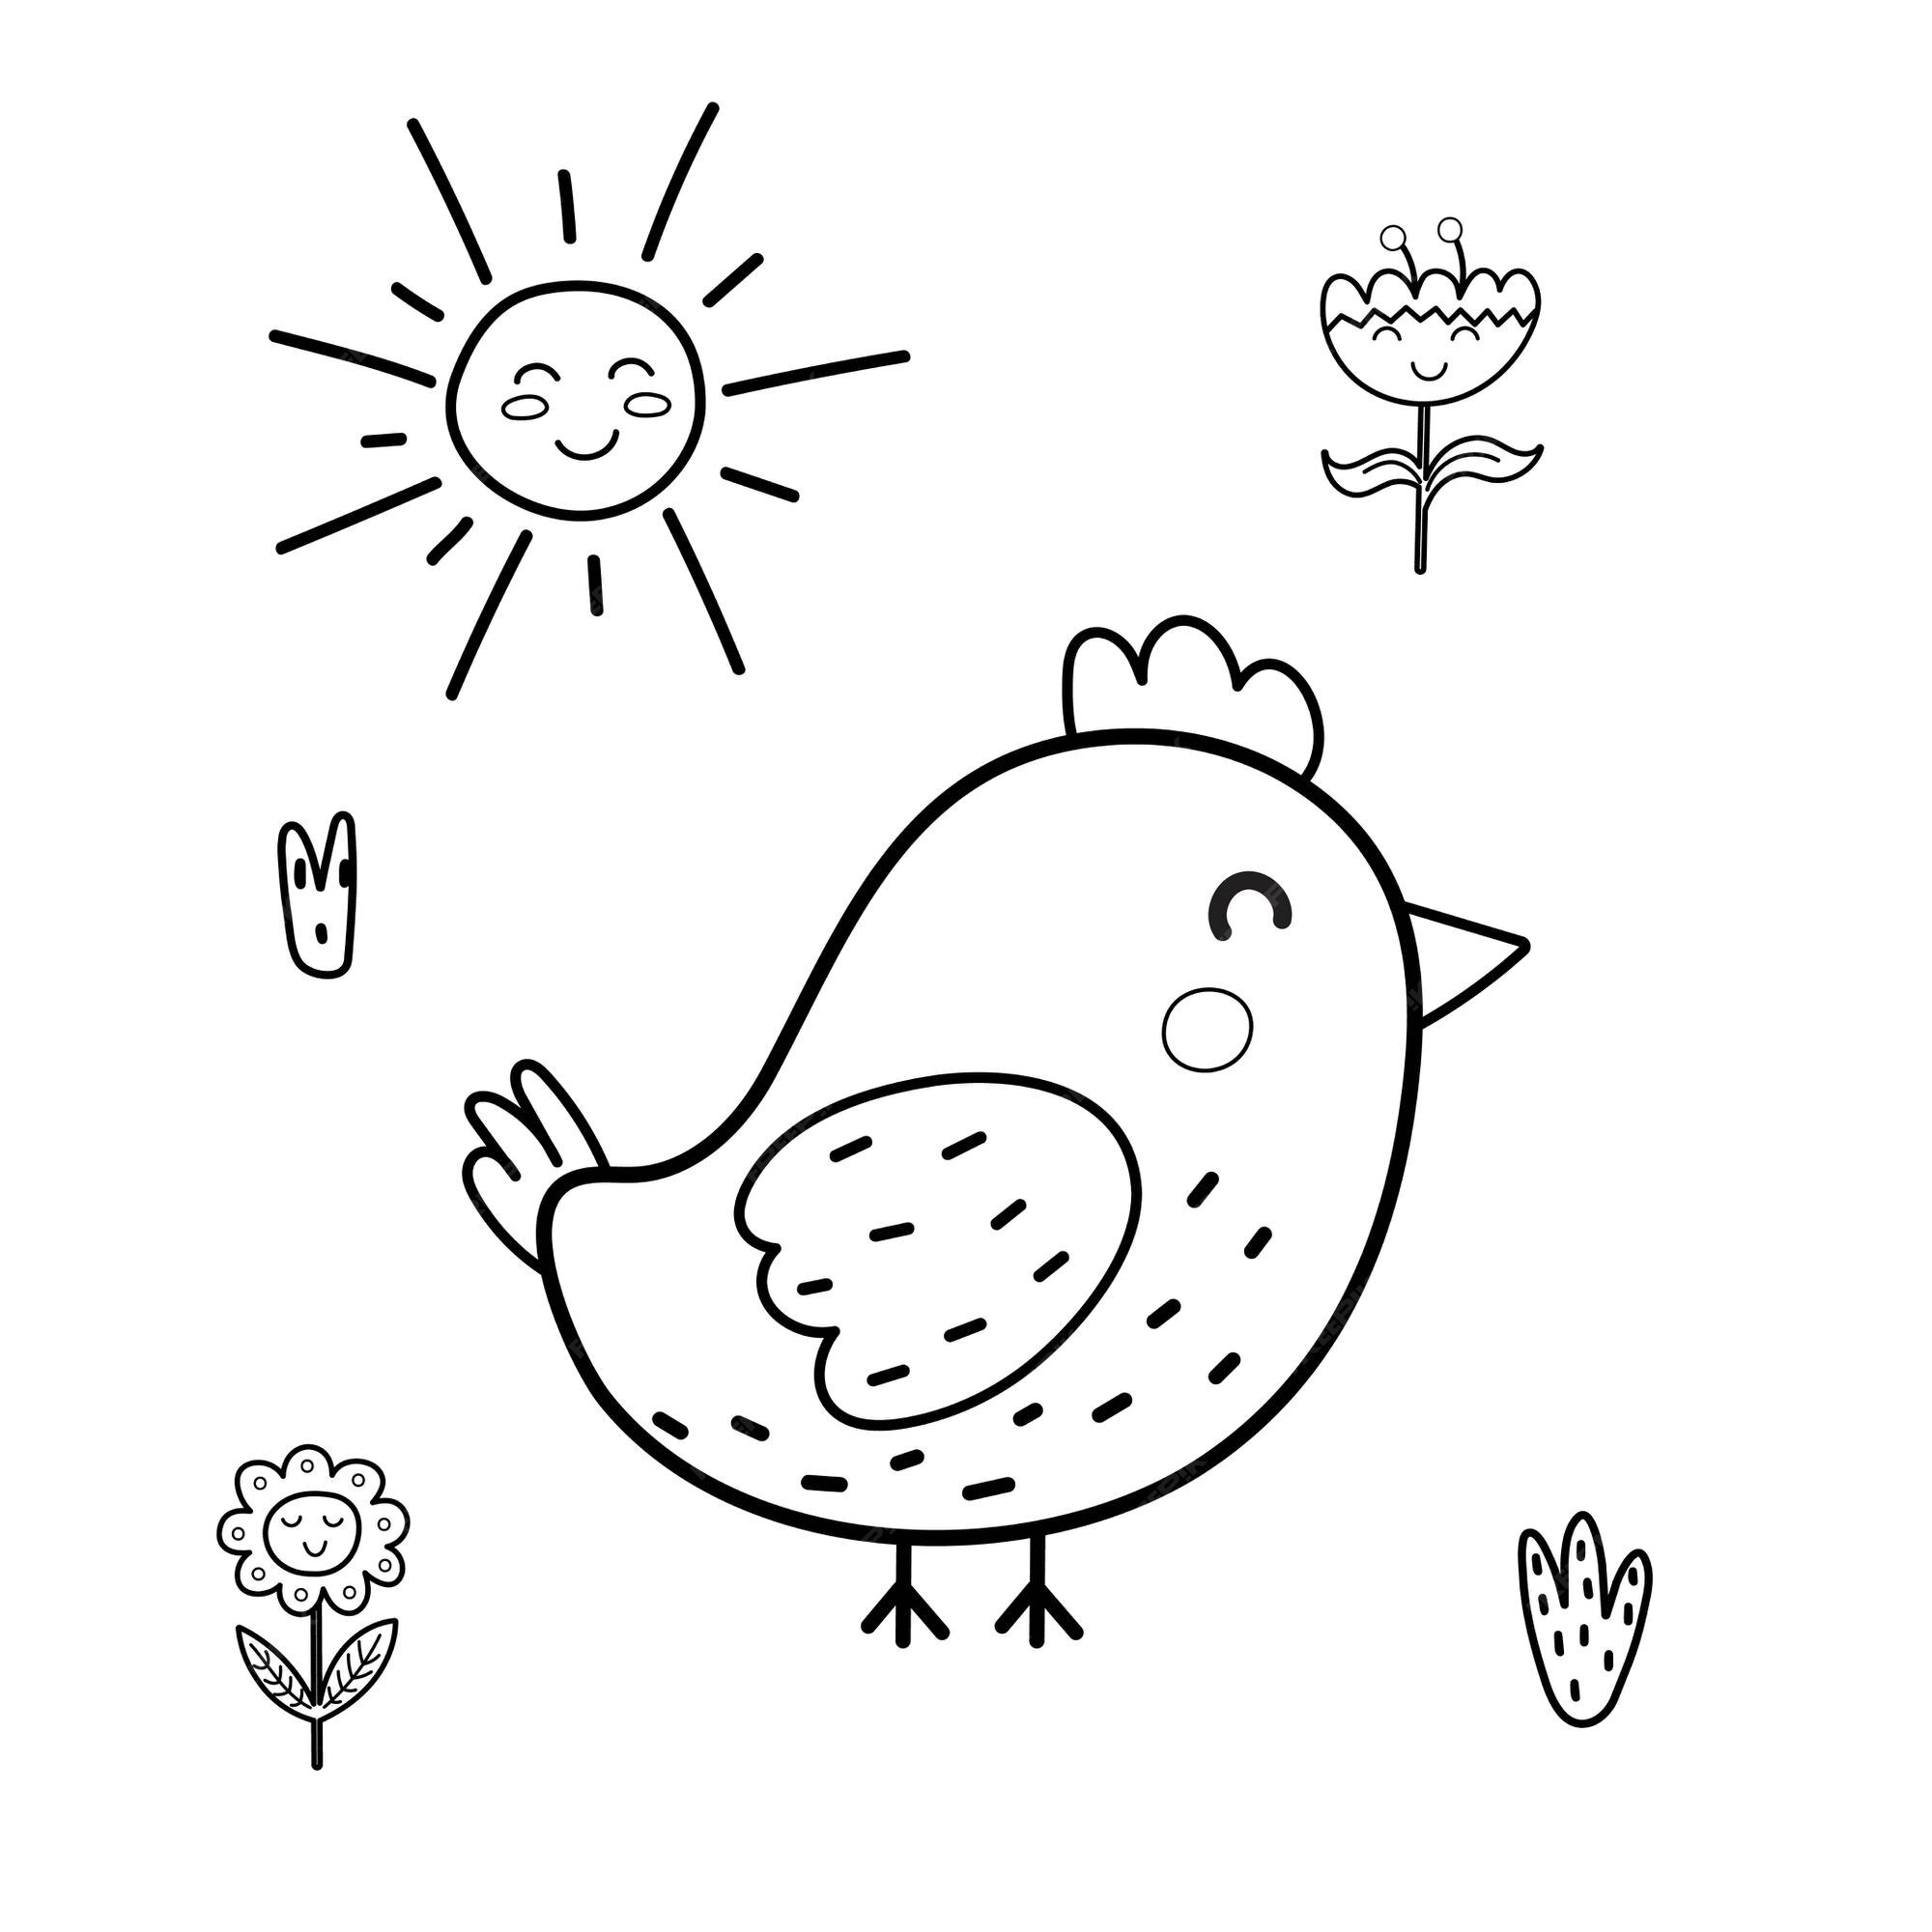 Premium Vector | Cute bird coloring page for kids sunny day black and white